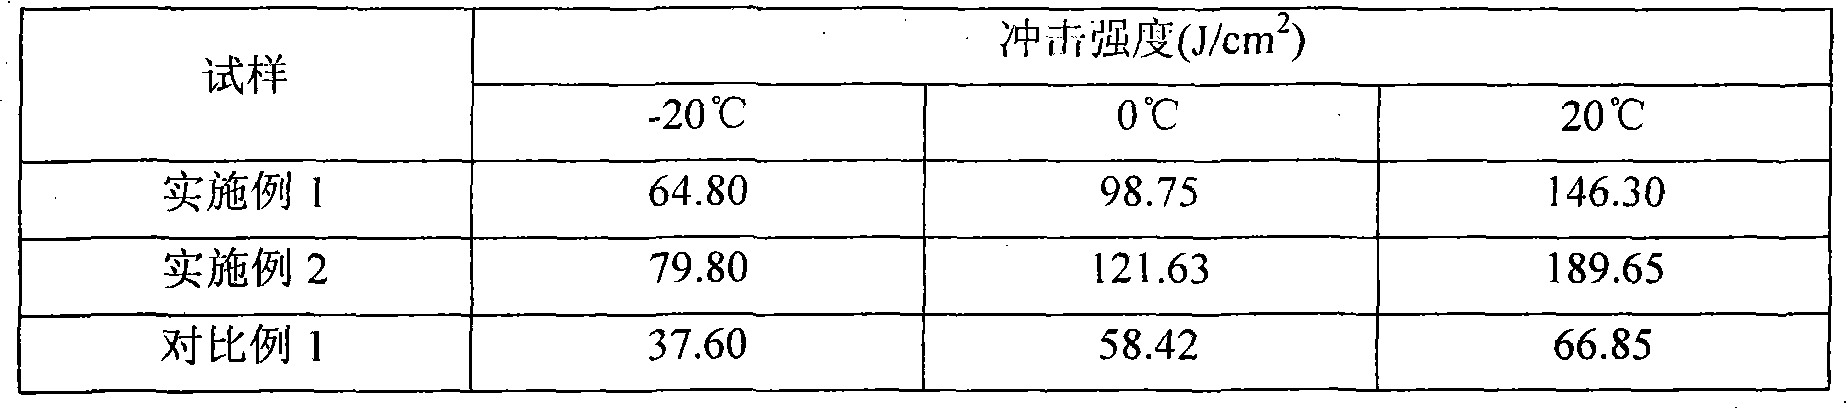 Austenitic stainless steel containing rare-earth element